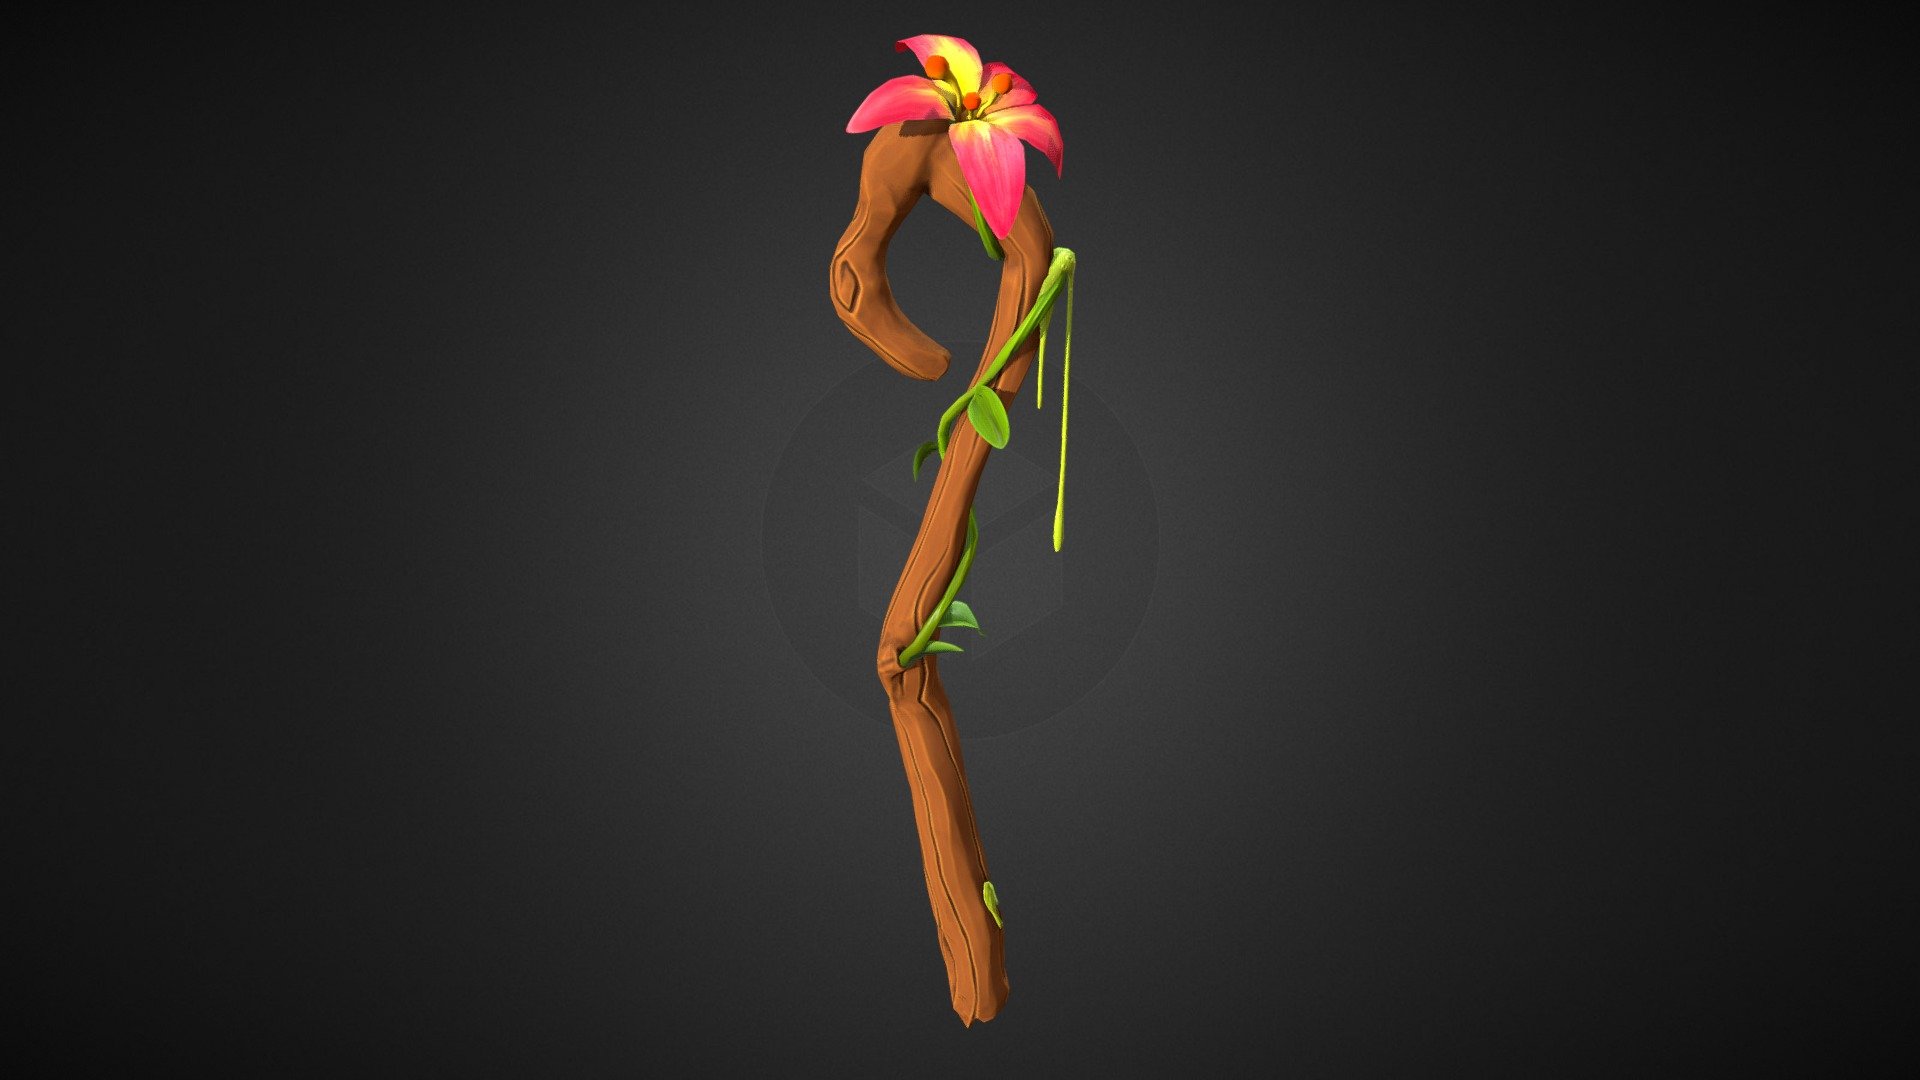 I tried to create something from scratch to improve my skills in 3D software. Based on my concept I started from ZBrush then I retopology/unwrap/polypaint in 3D Coat with some support in Photoshop. I learned a lot during this case. I'm going to prepare more of stylised stuff so stay tuned! - Stylised hand painted staff - 3D model by Damian Patkowski (@danutunad) 3d model